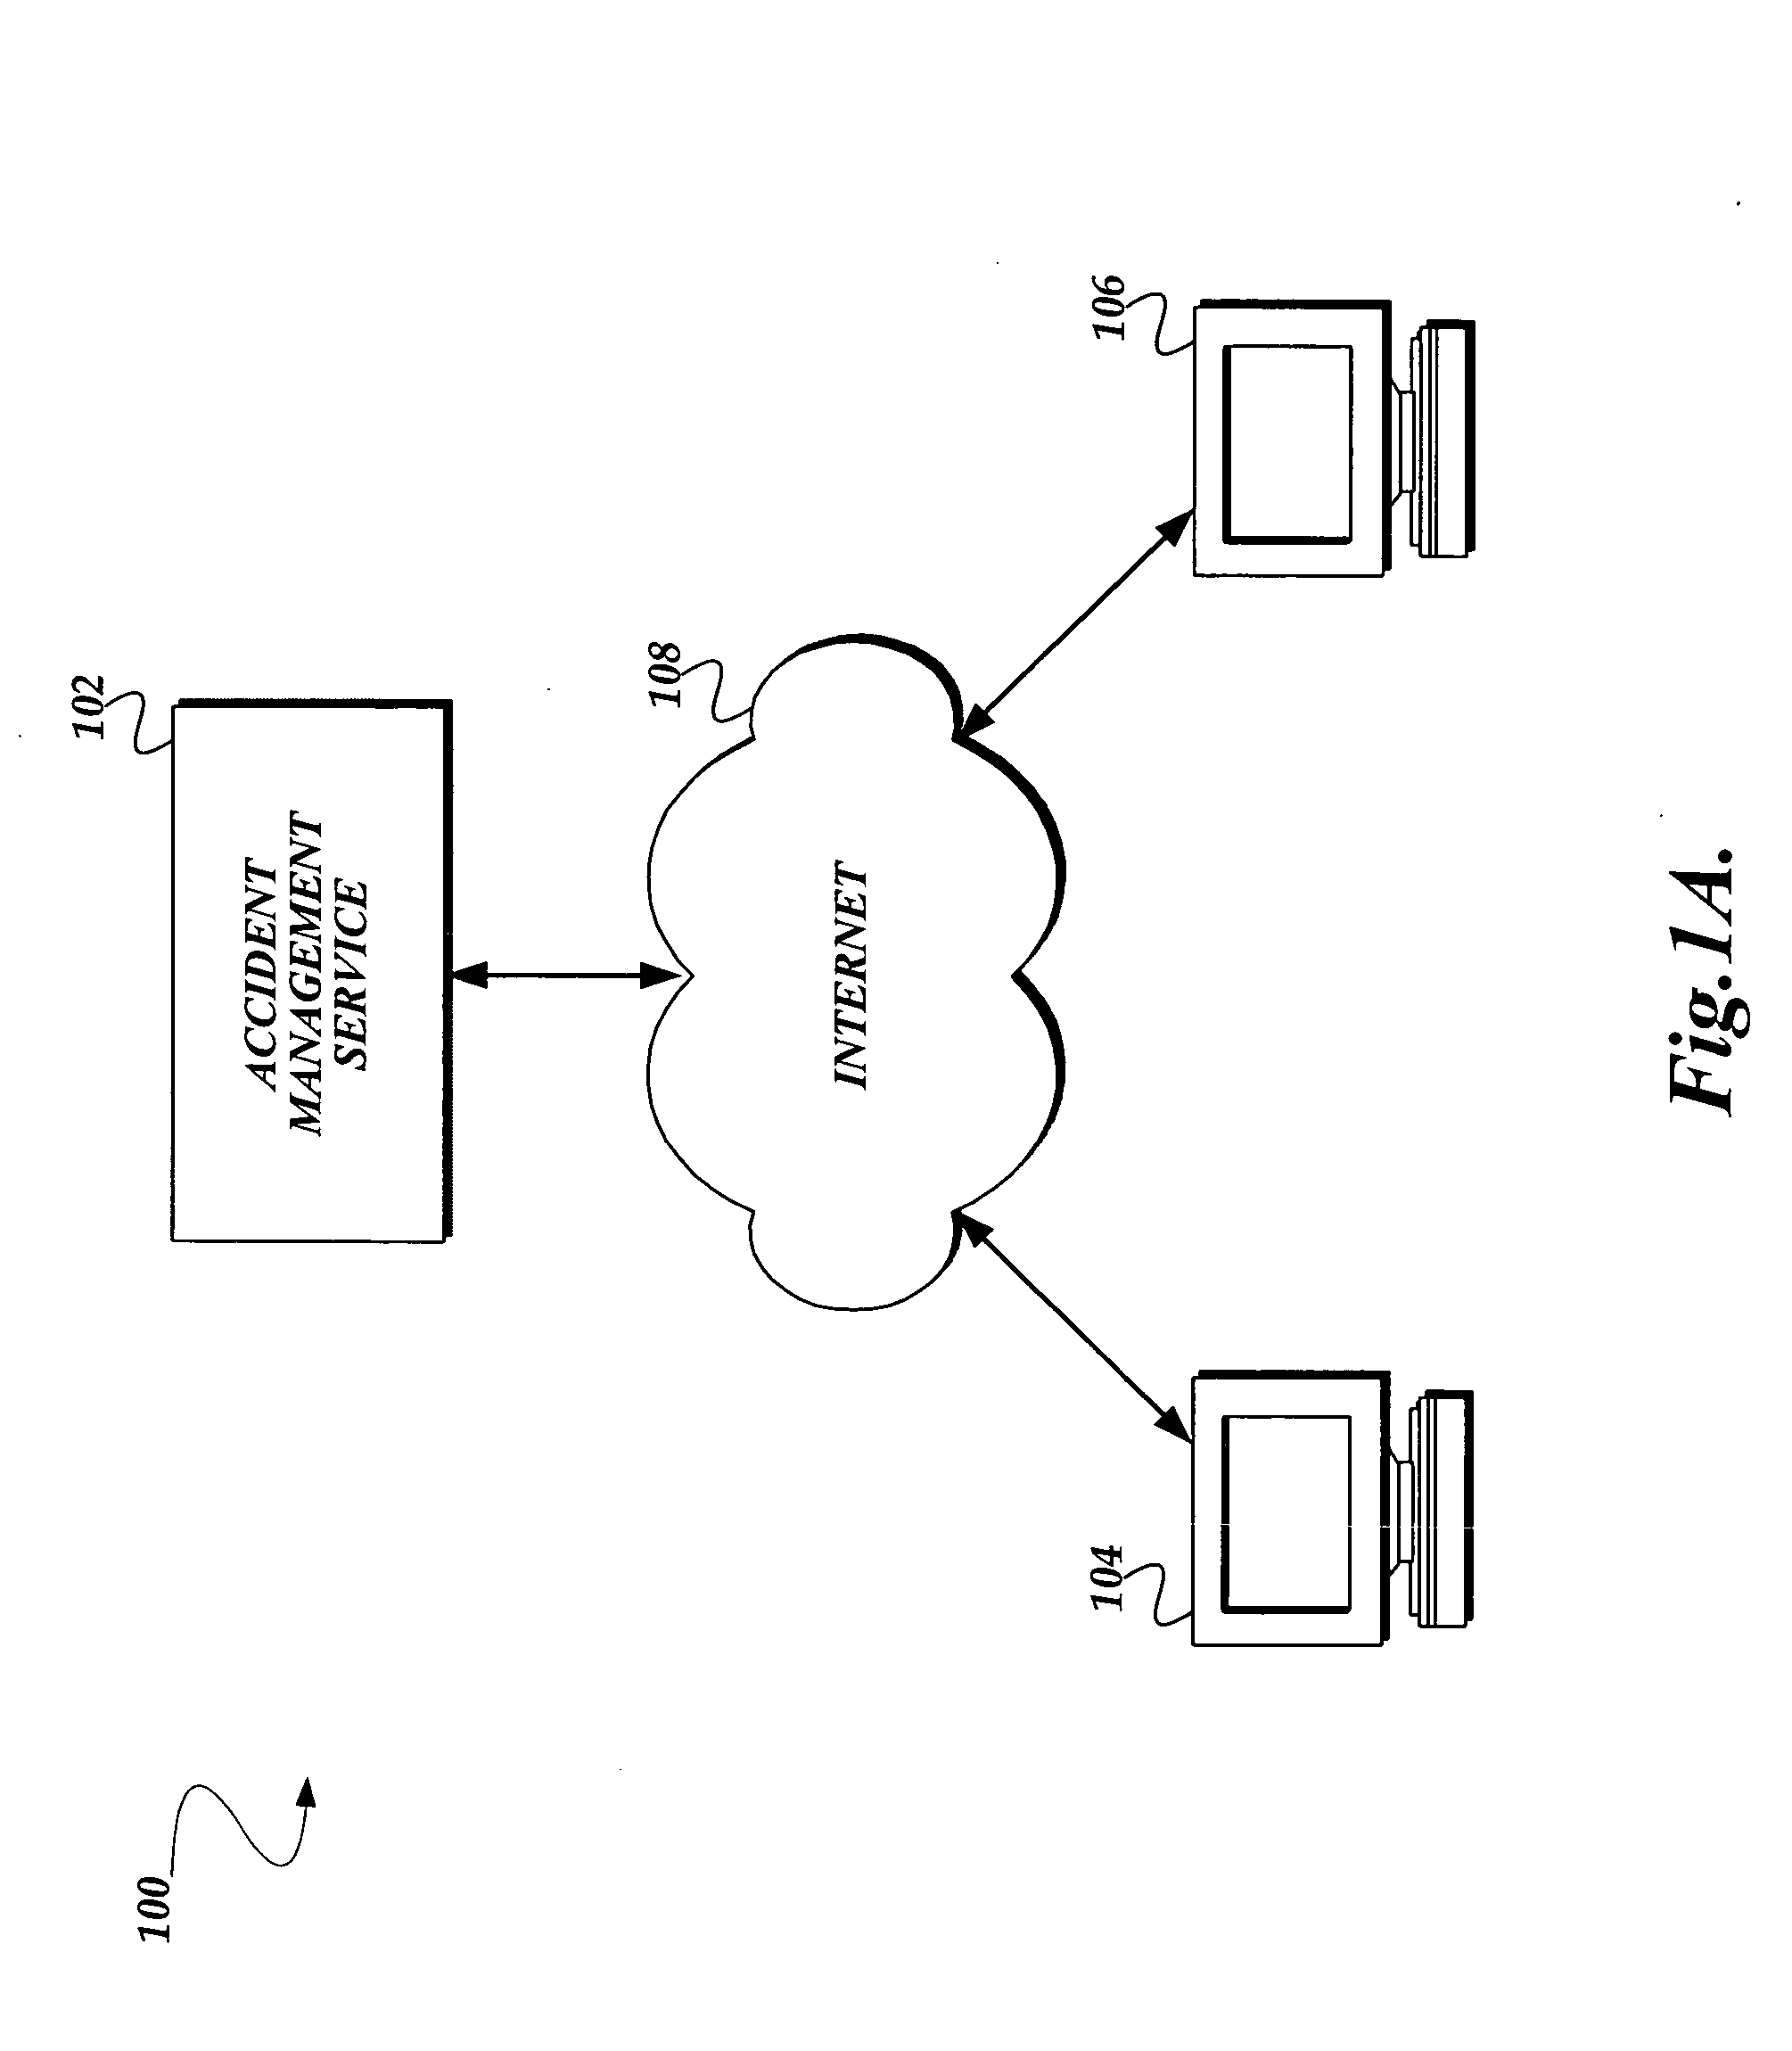 System and method for providing automated accident management services